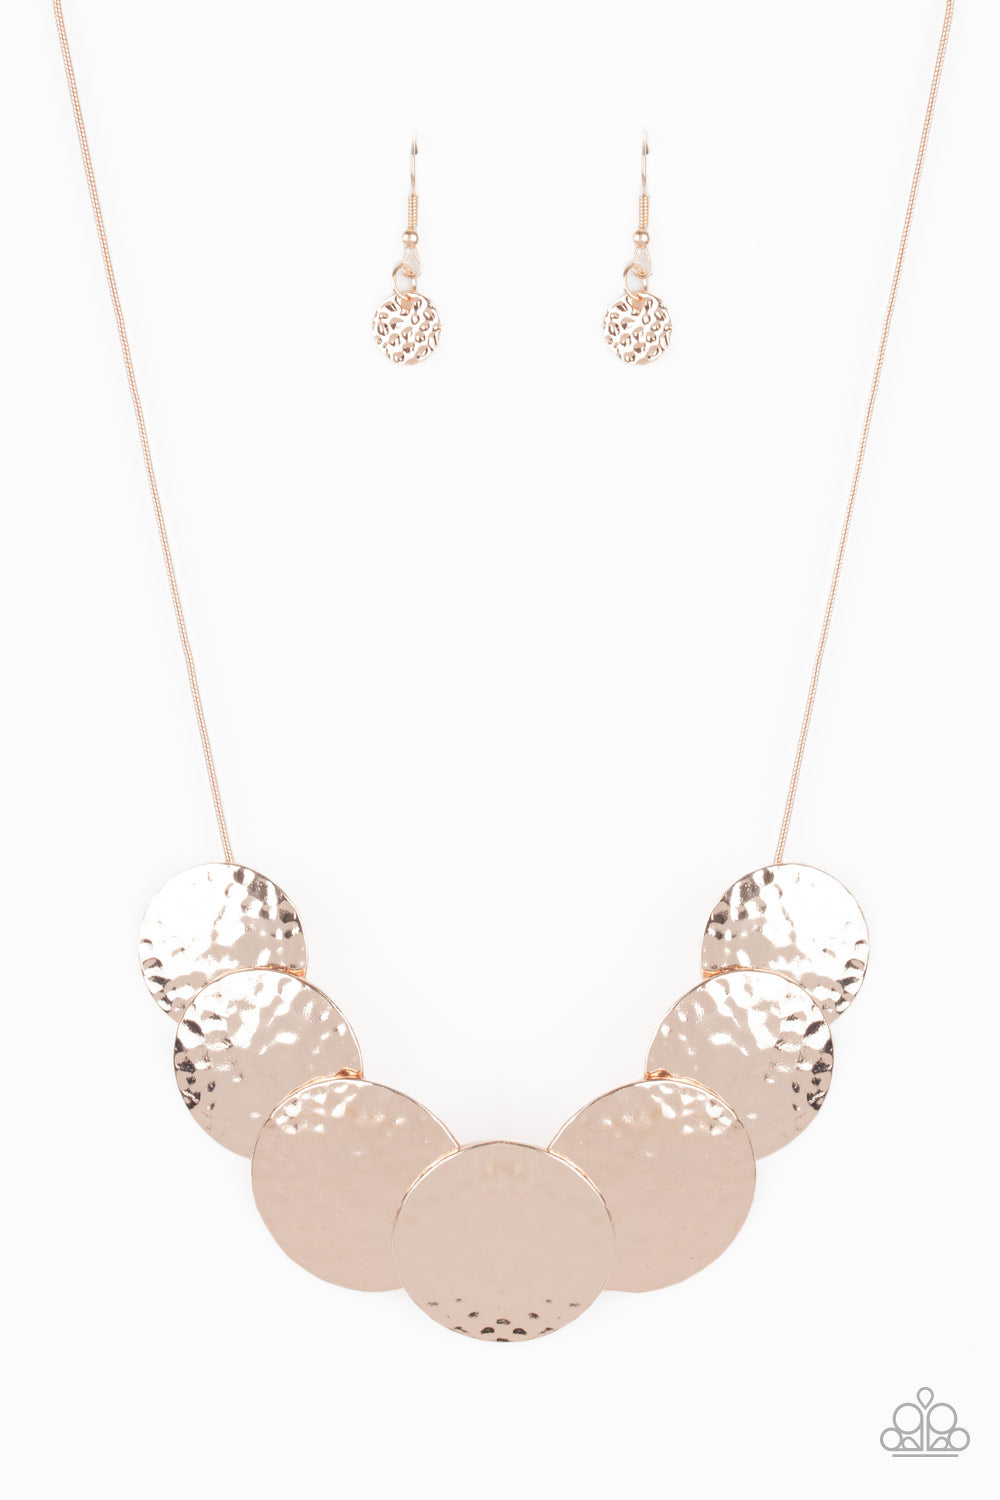 Paparazzi Accessories RADIAL Waves - Rose Gold Necklaces - Lady T Accessories